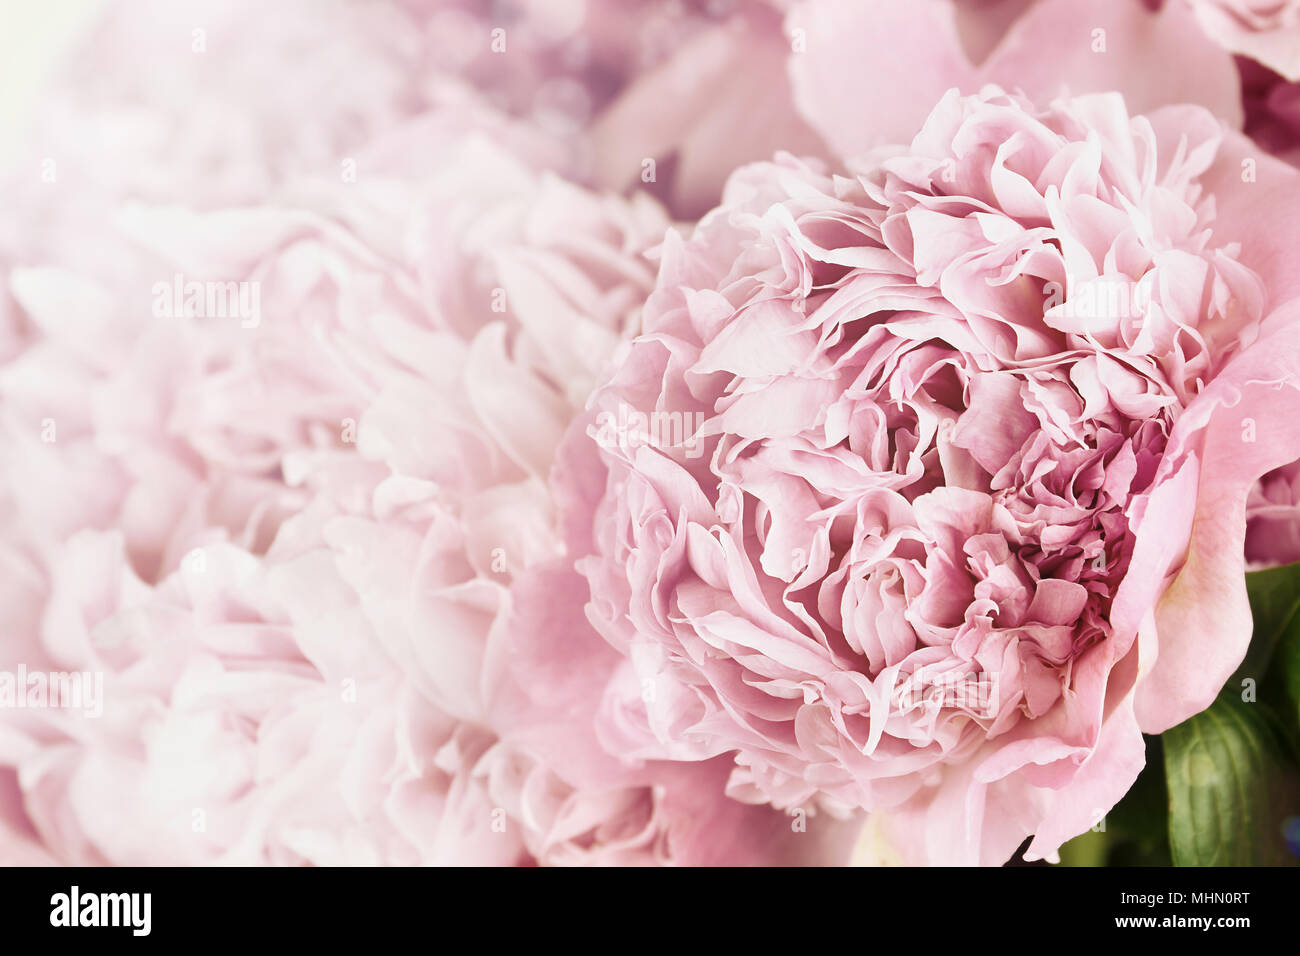 Beautiful toned pink peonies in the sunlight. Extremely shallow depth of field with selective focus on flower in foreground. Stock Photo